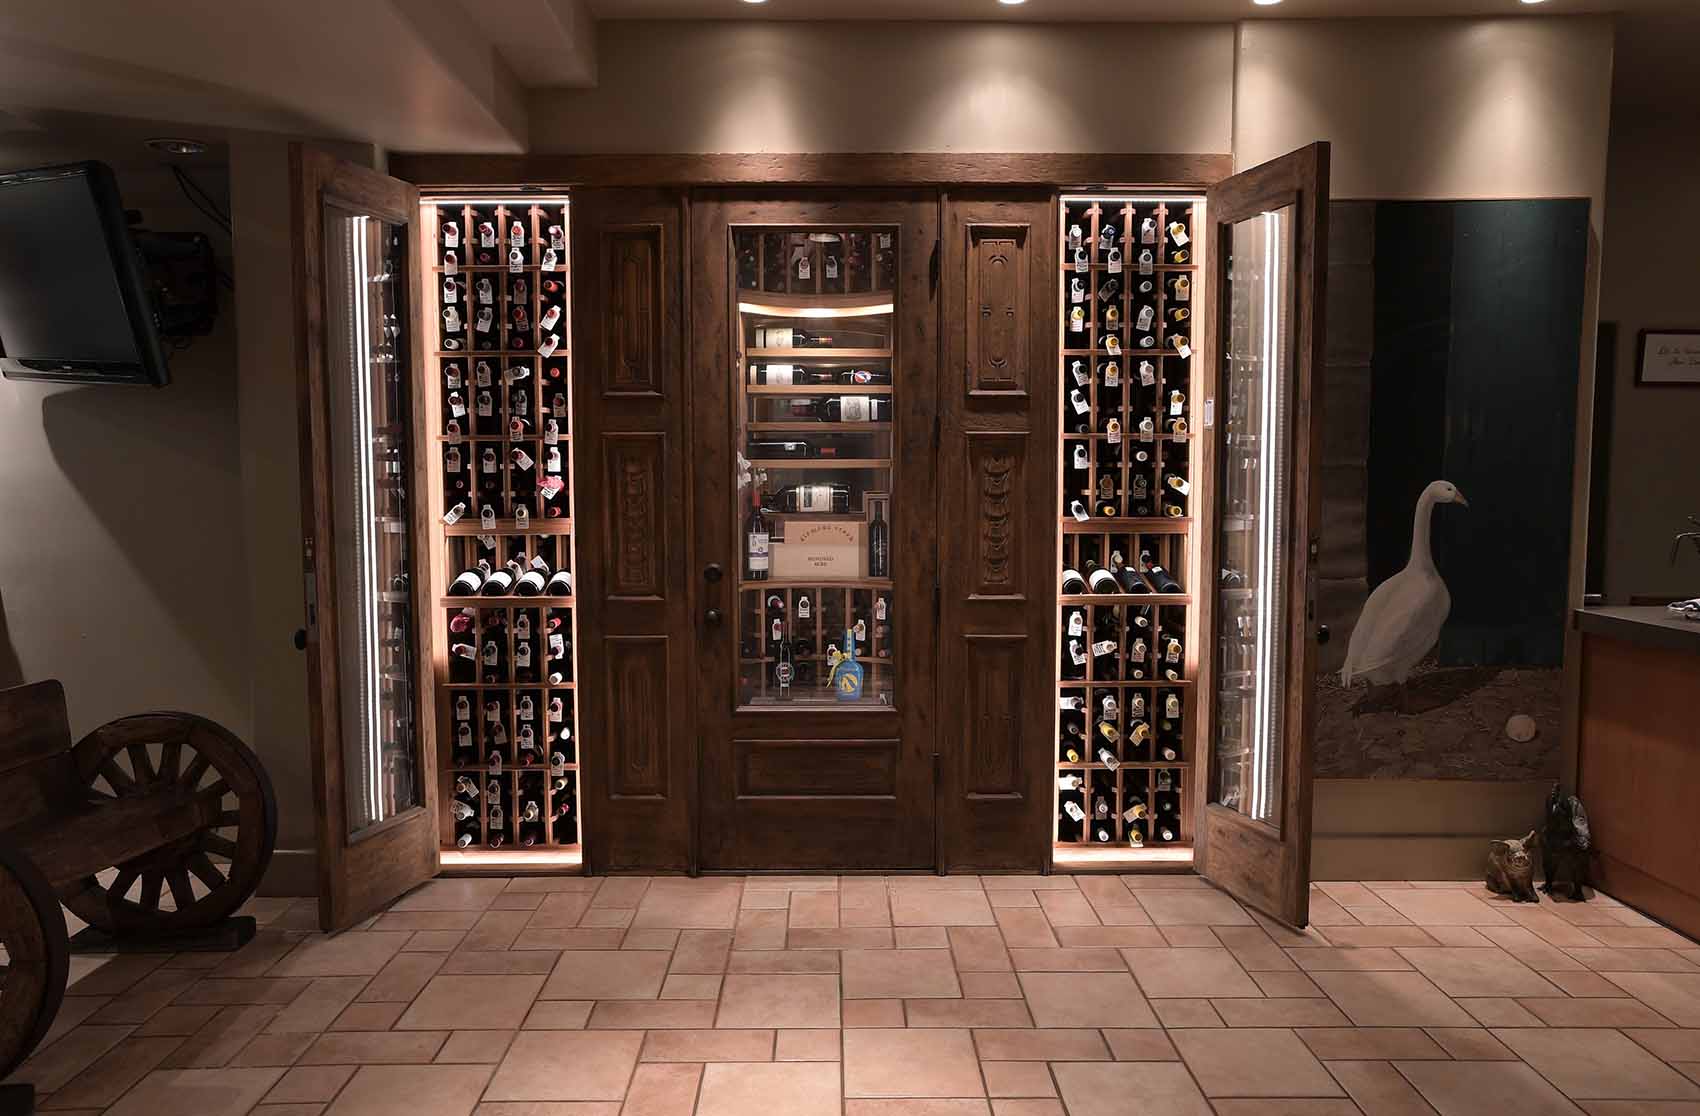 LED lighting enhancing the showcasing ability of this small wine cellar